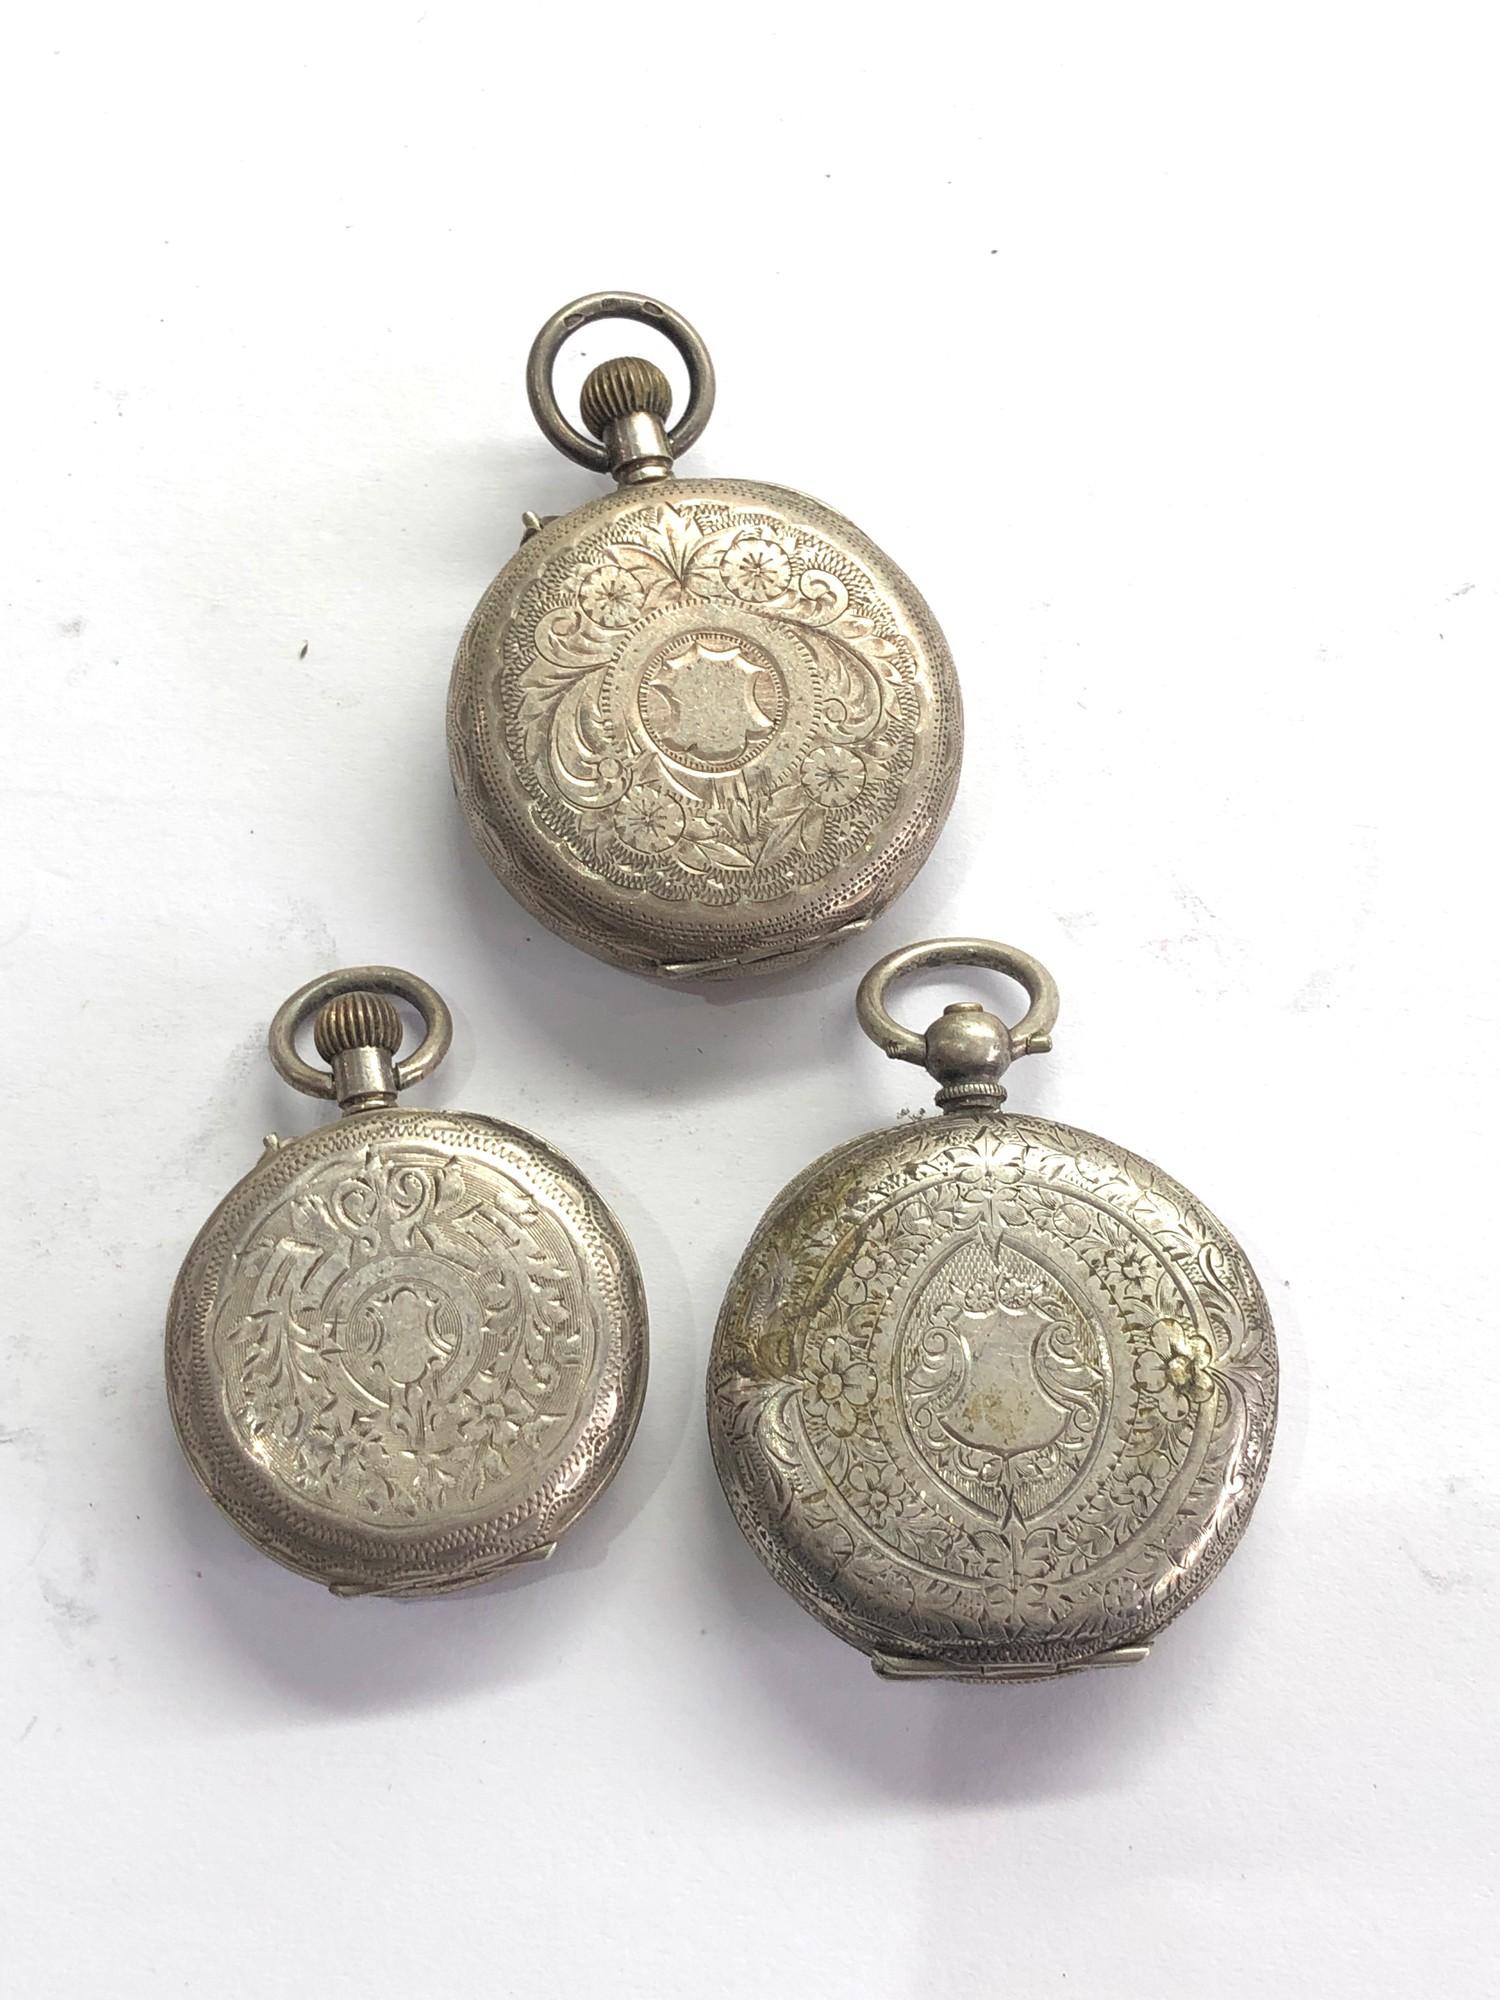 3 Antique silver fob watches all complete non working spares or repair please see images for details - Image 2 of 2